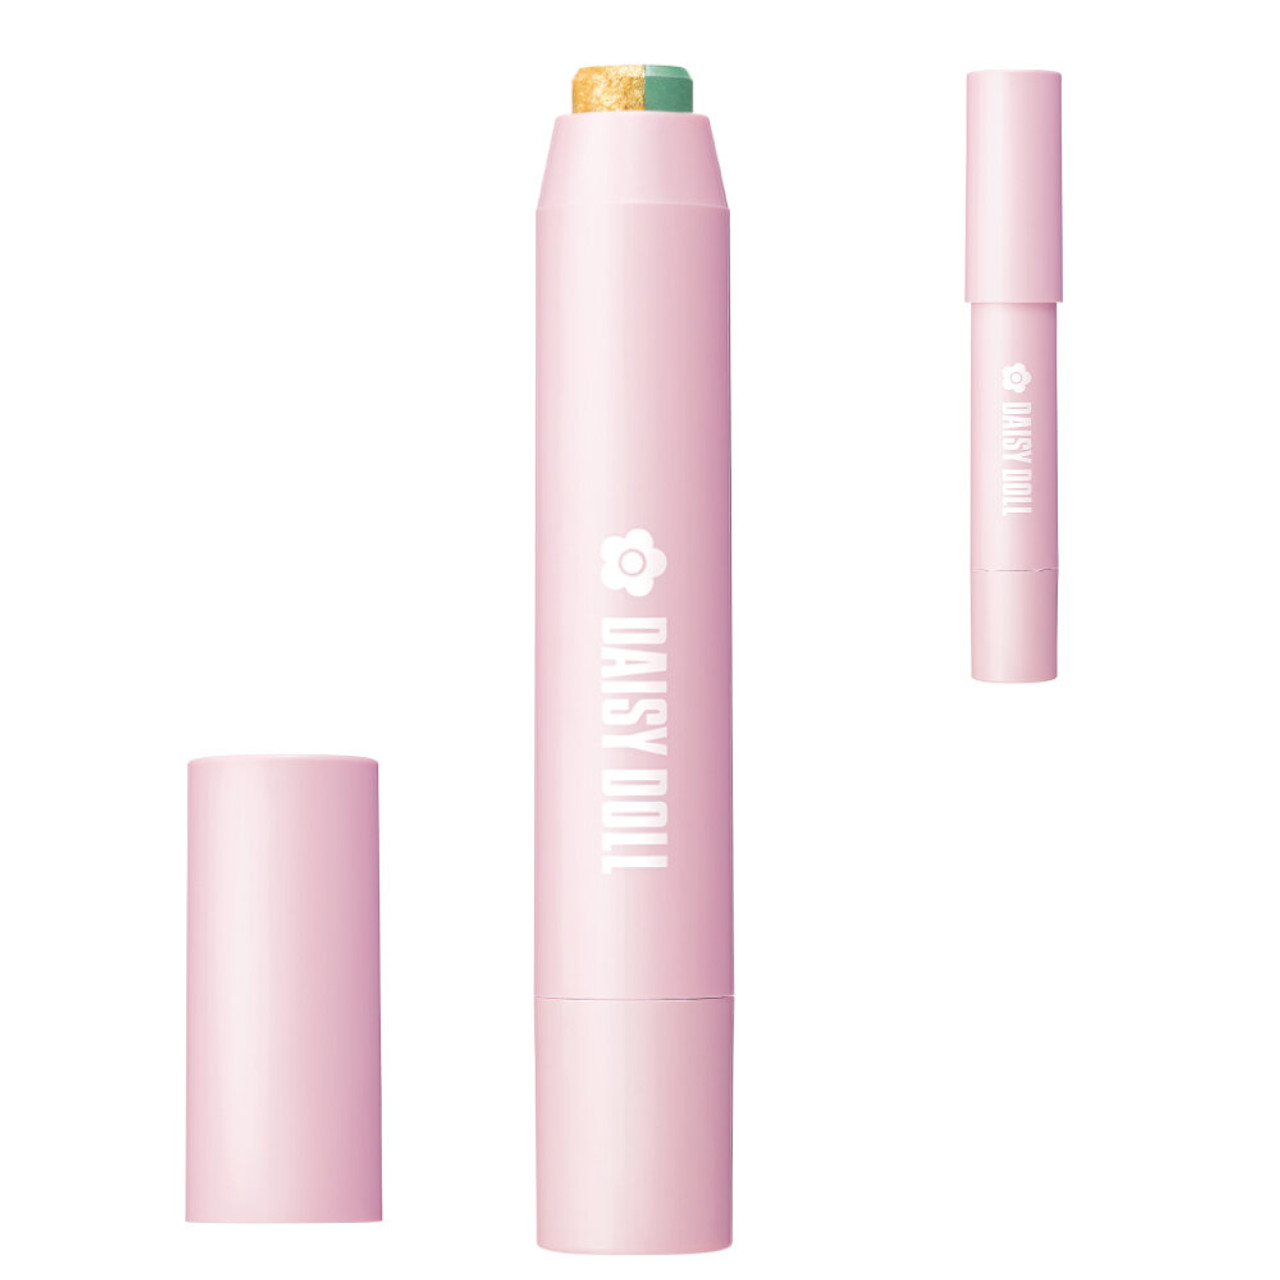 A pink eyeshadow stick with Daisy Doll and the Mary Quant Daisy printed on the side in white. The cap is off, showing the stick eyeshadow. There is a smaller image showing the stick with the cap on to the side. This shade is G01, lime fizz. The right side of the eyeshadow is sparkly lime green, and the left side is sparkly yellow gold.